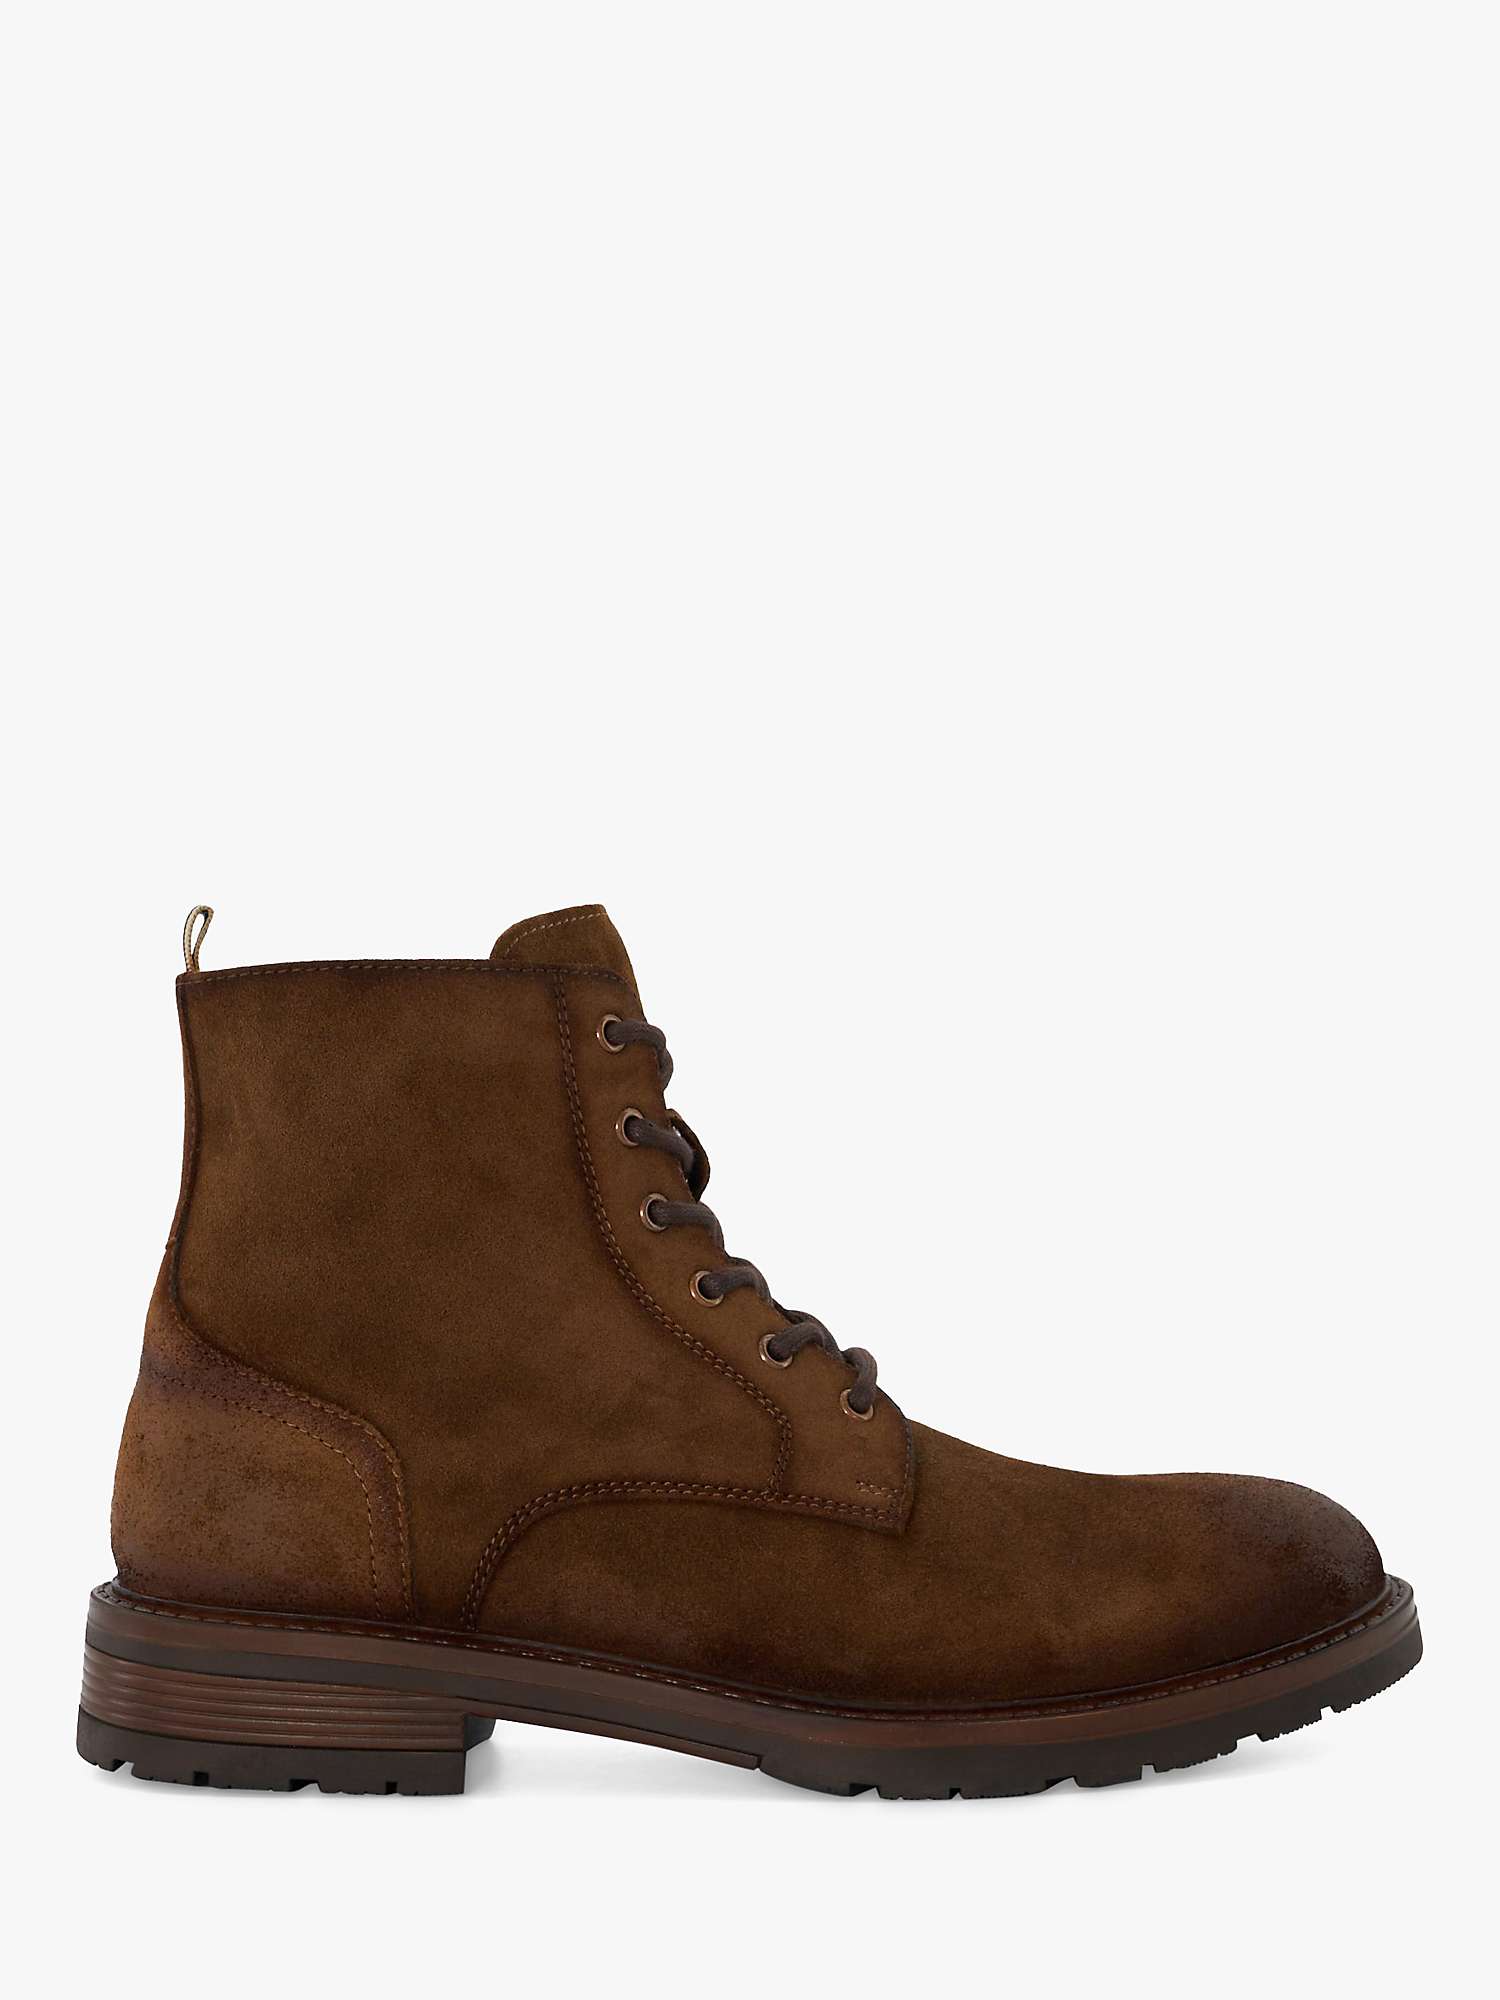 Buy Dune Cheshires Suede Boots, Tan Online at johnlewis.com